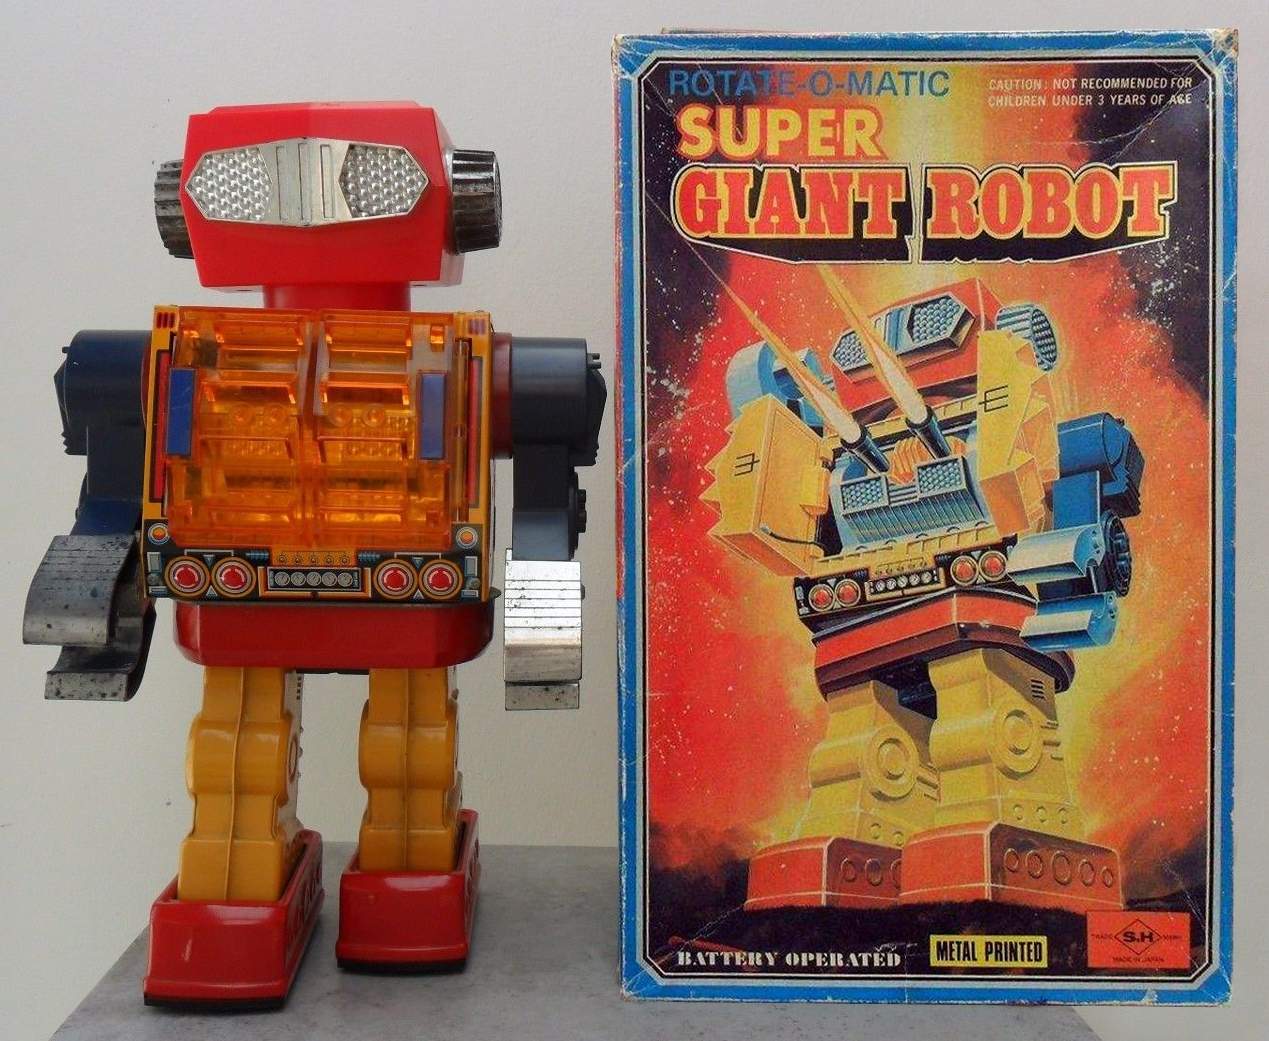 Super Giant Robot by H.K. Horikawa - The Old Robots Web Site